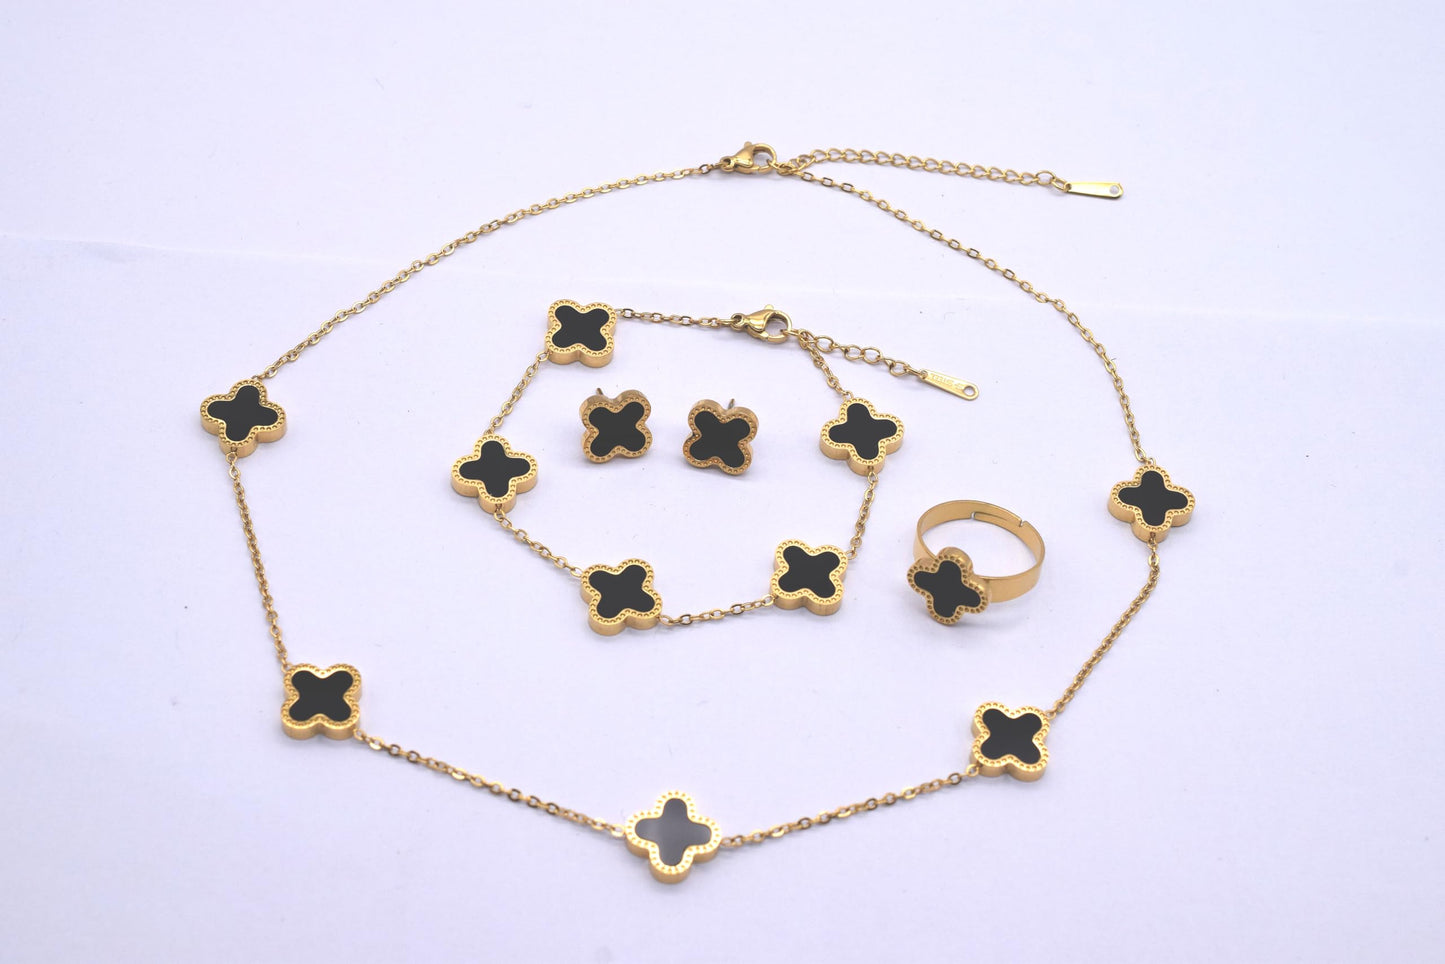 Clover Jewelry Set 18K Gold Plated